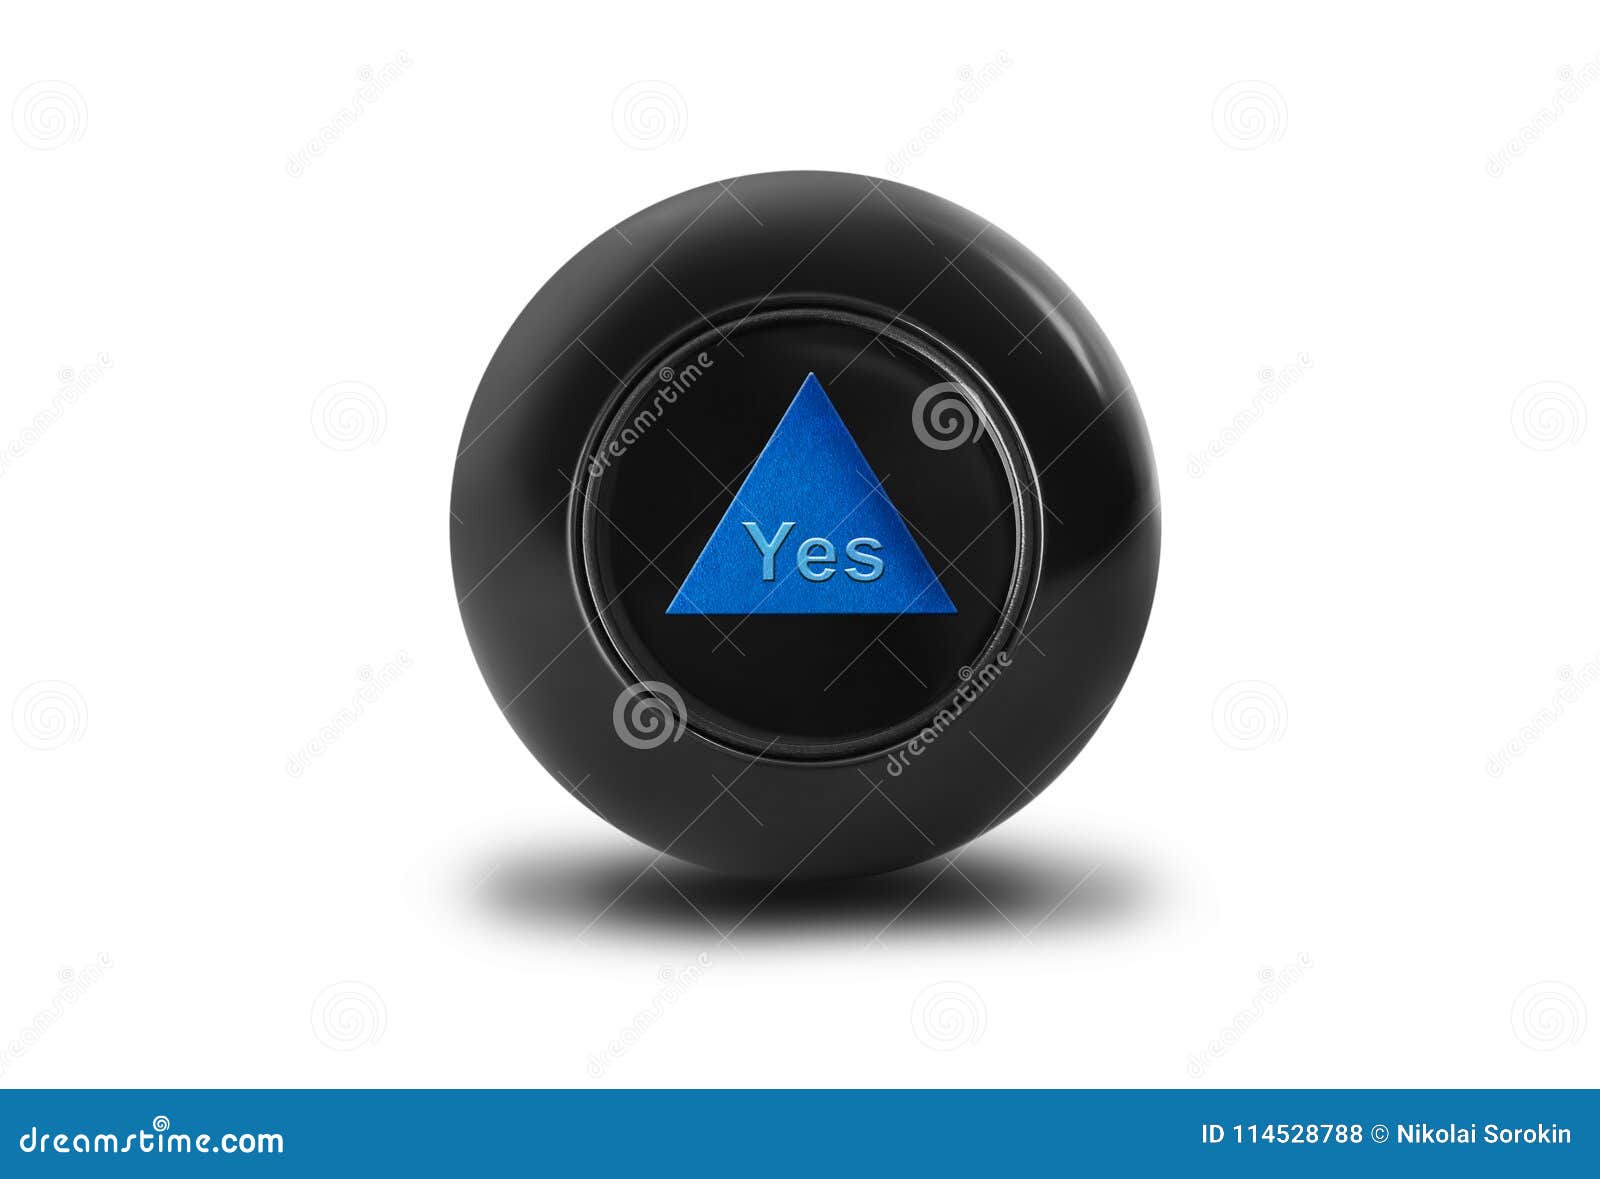 magic ball with prediction yes